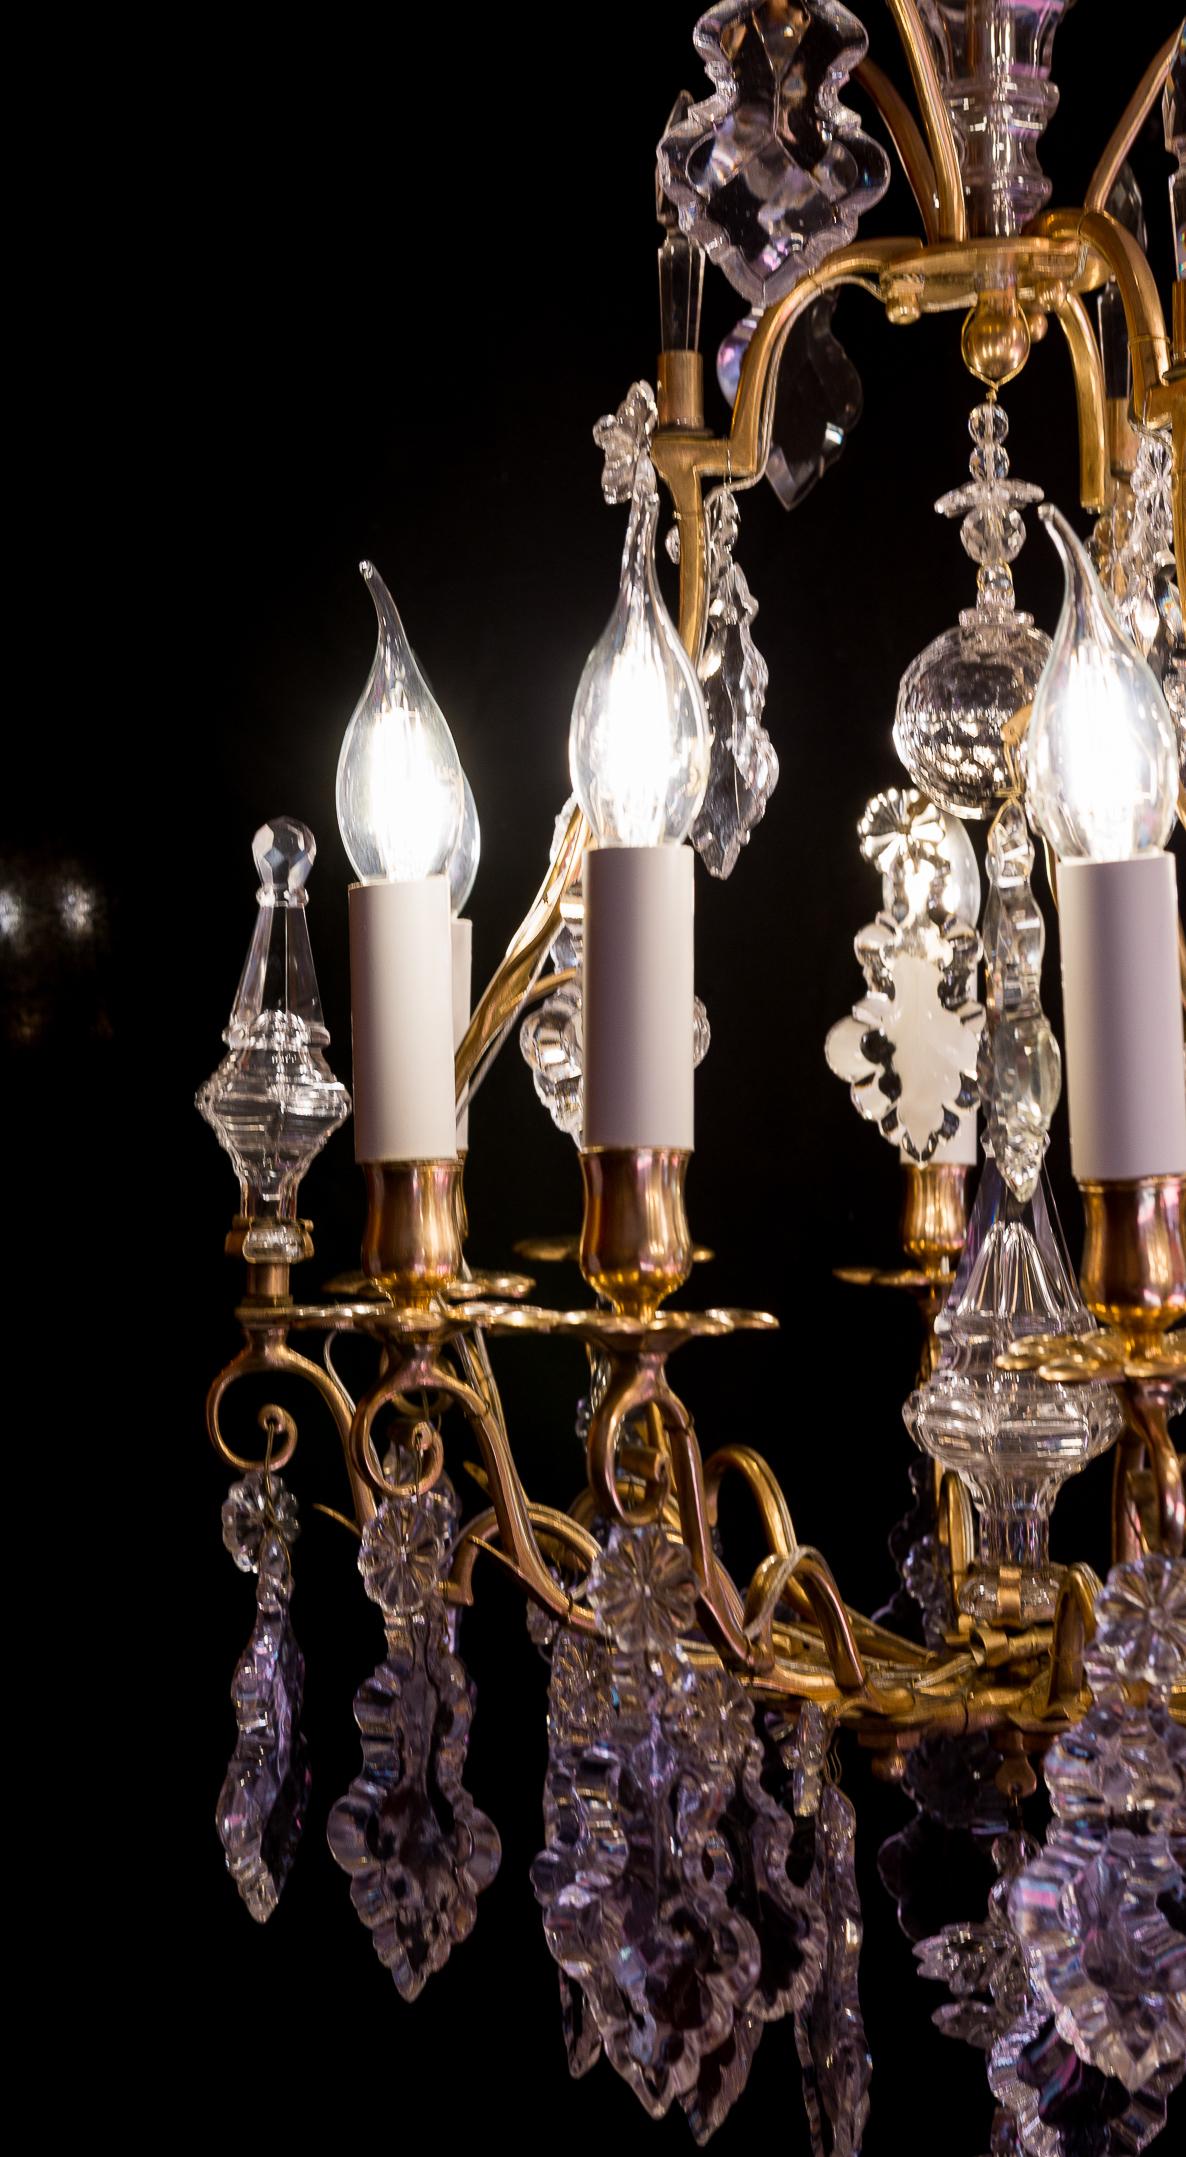 19th Century French Louis XV Style Gilt-Bronze and Baccarat Cut Crystal Chandelier circa 1880